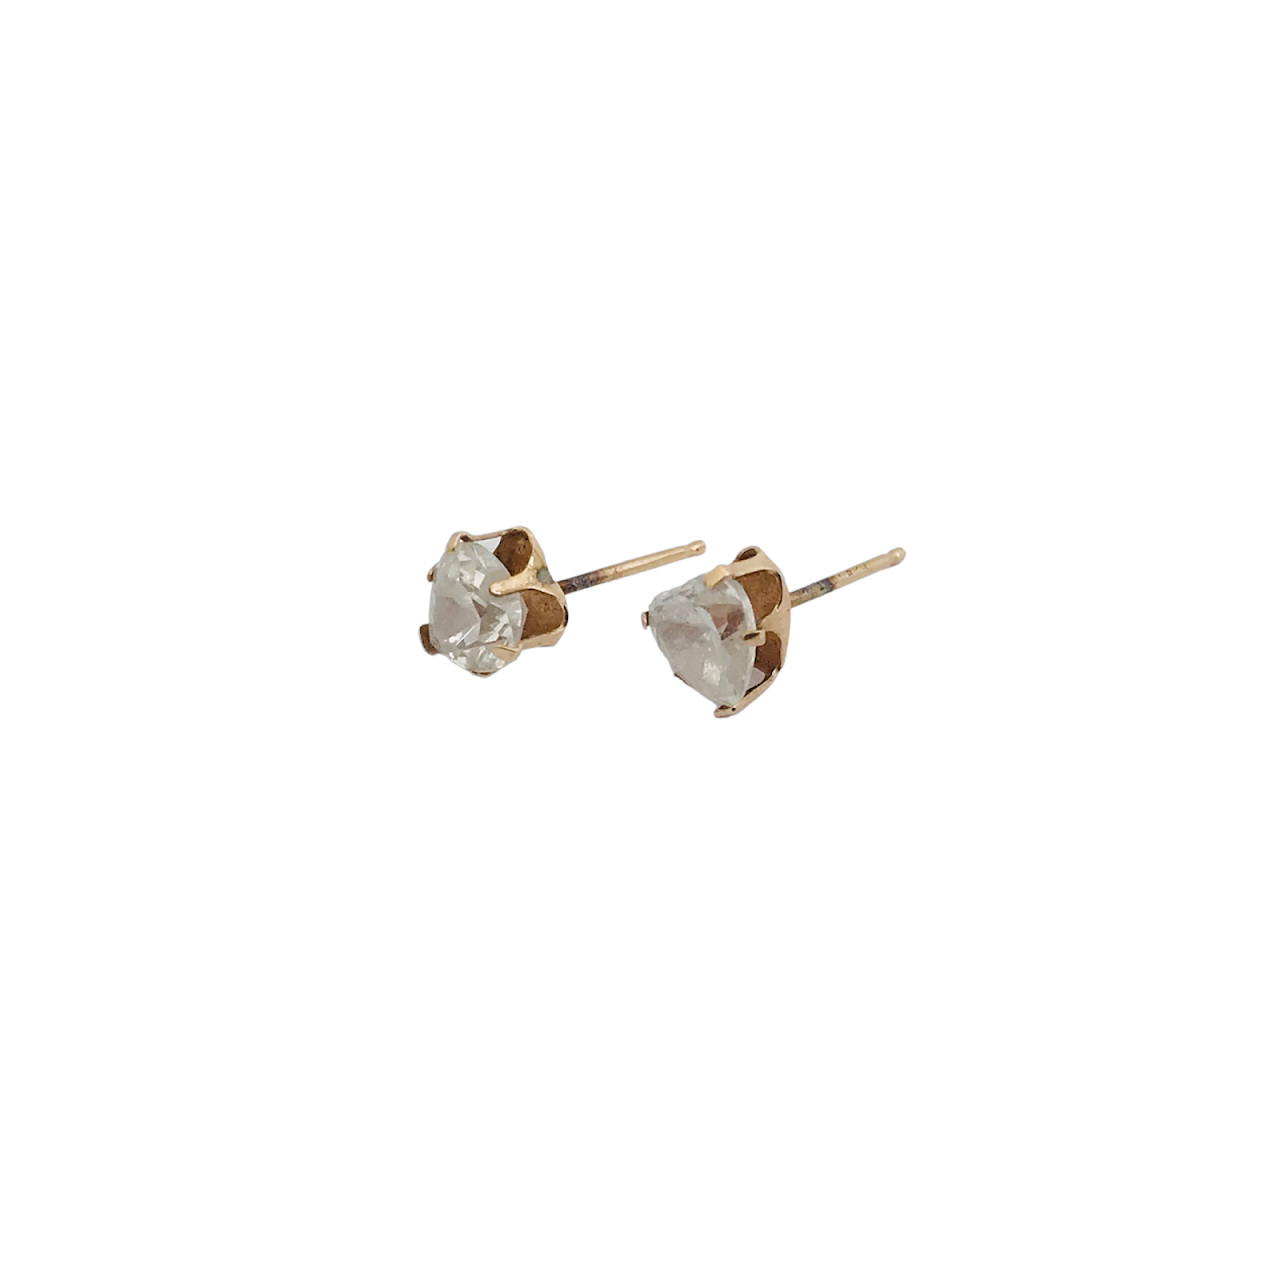 10K Gold and CZ Stud Earrings